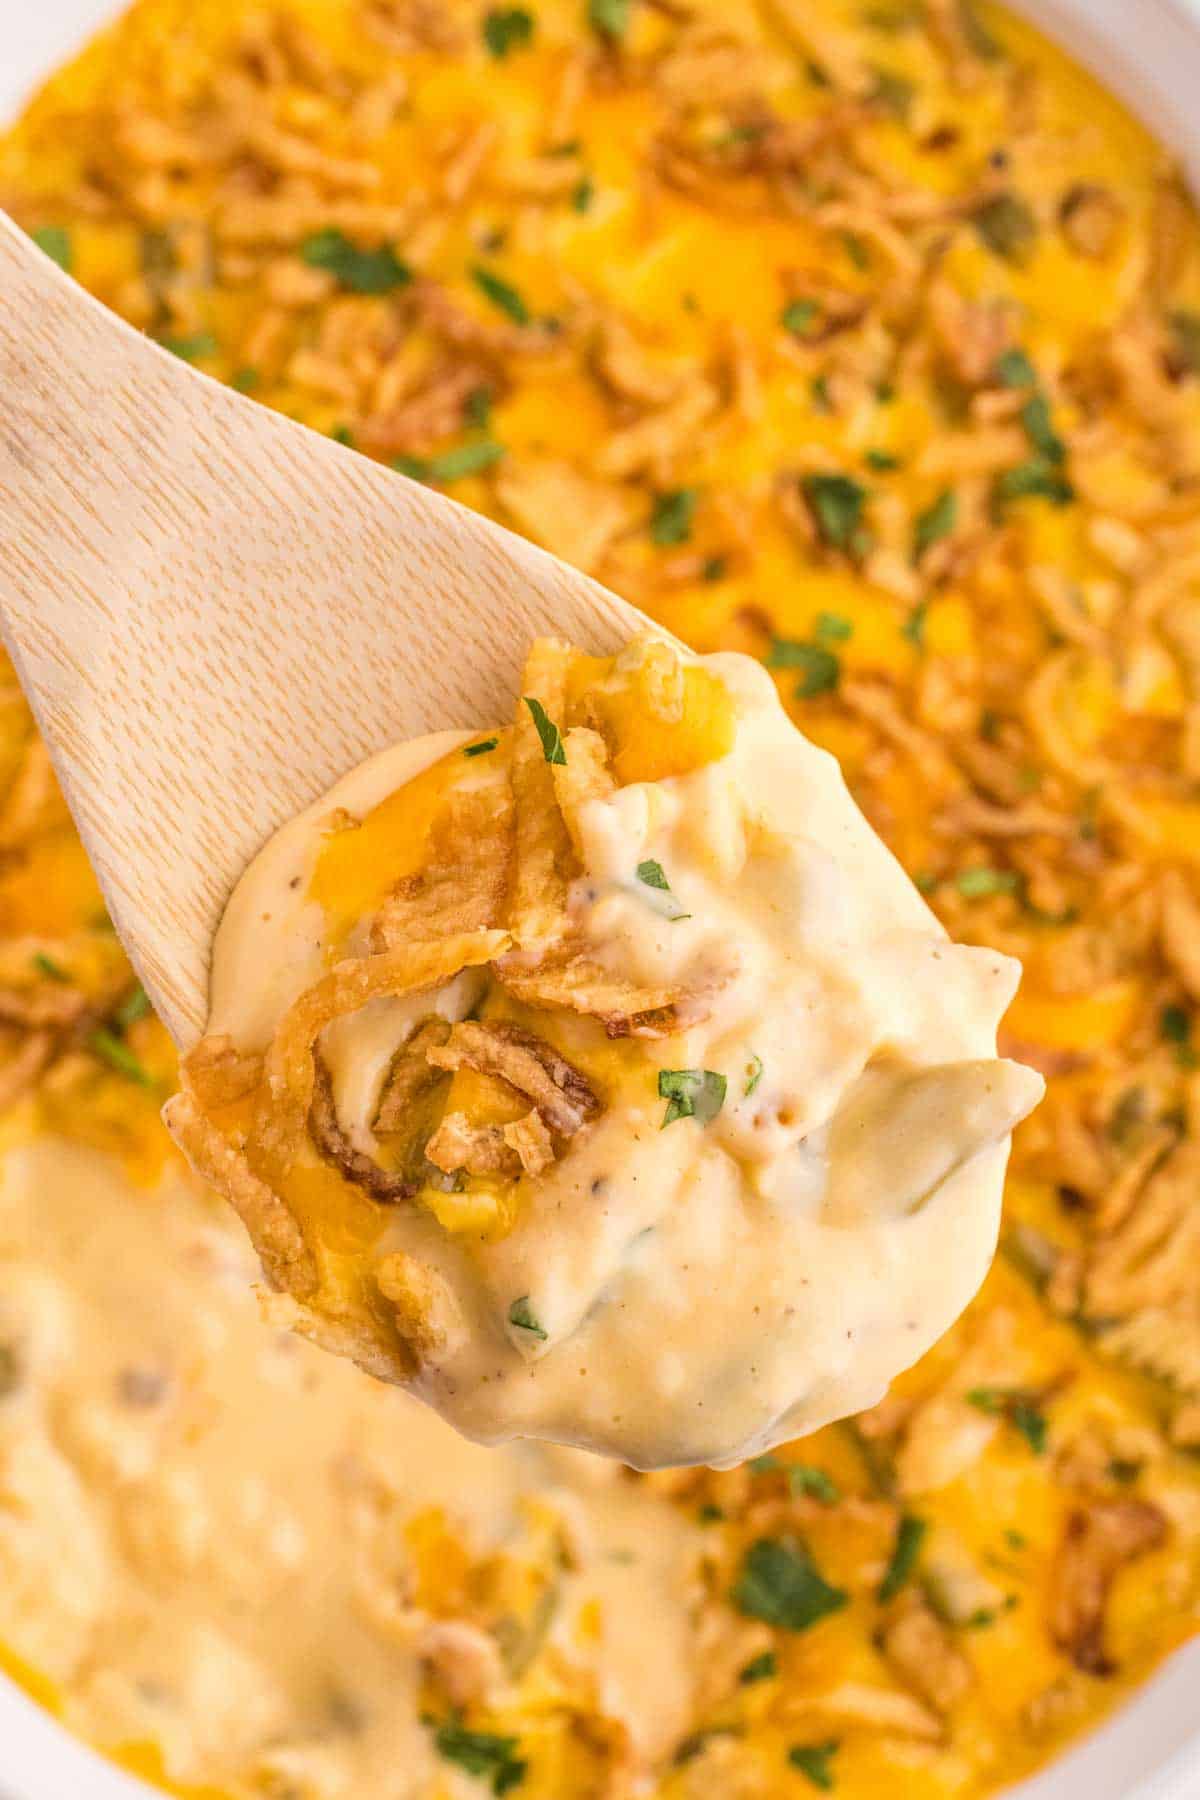 Green Bean Casserole with Velveeta is a classic holiday side dish made with canned green beans, cream of mushroom soup, Velveeta, shredded cheddar cheese and French's crispy fried onions.